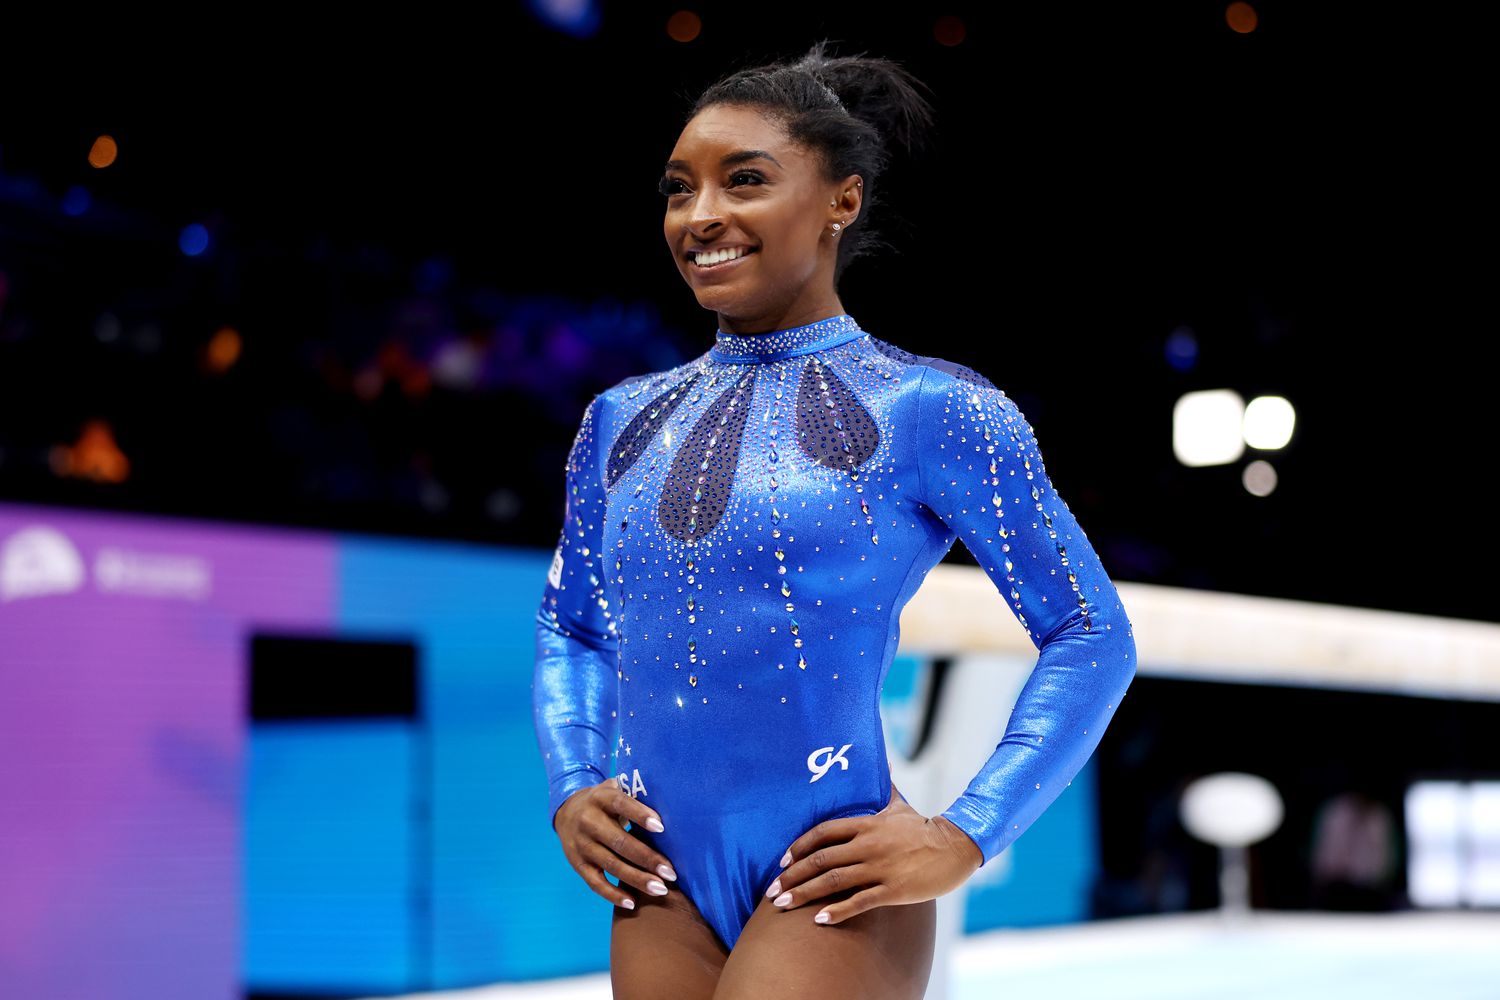 Simone Biles is most decorated gymnast in history with 34 medals -